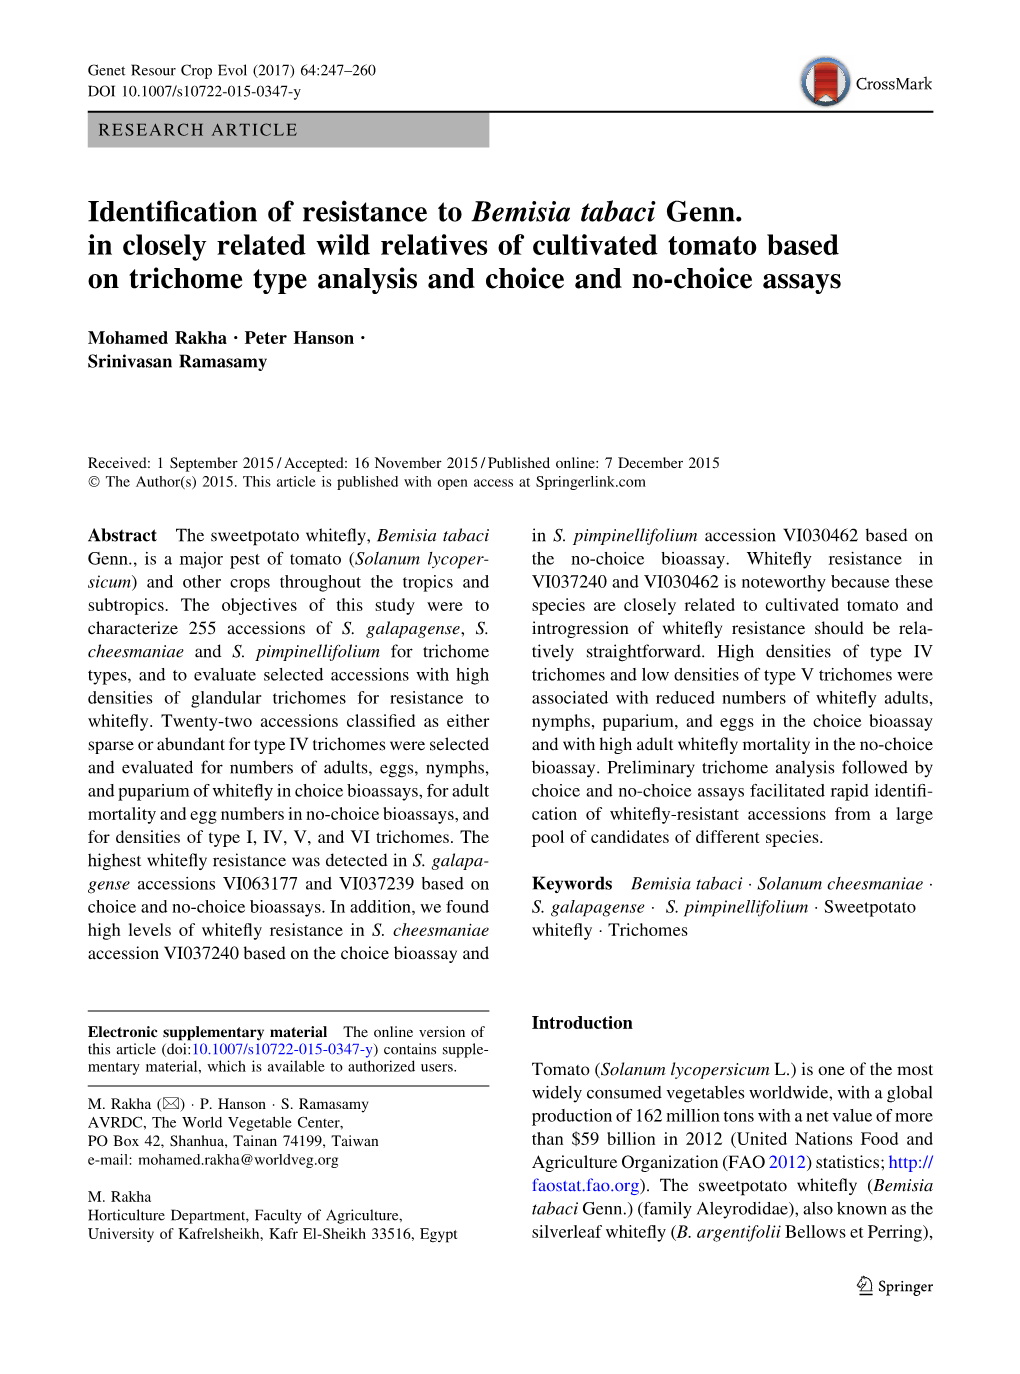 Identification of Resistance to Bemisia Tabaci Genn. in Closely Related Wild